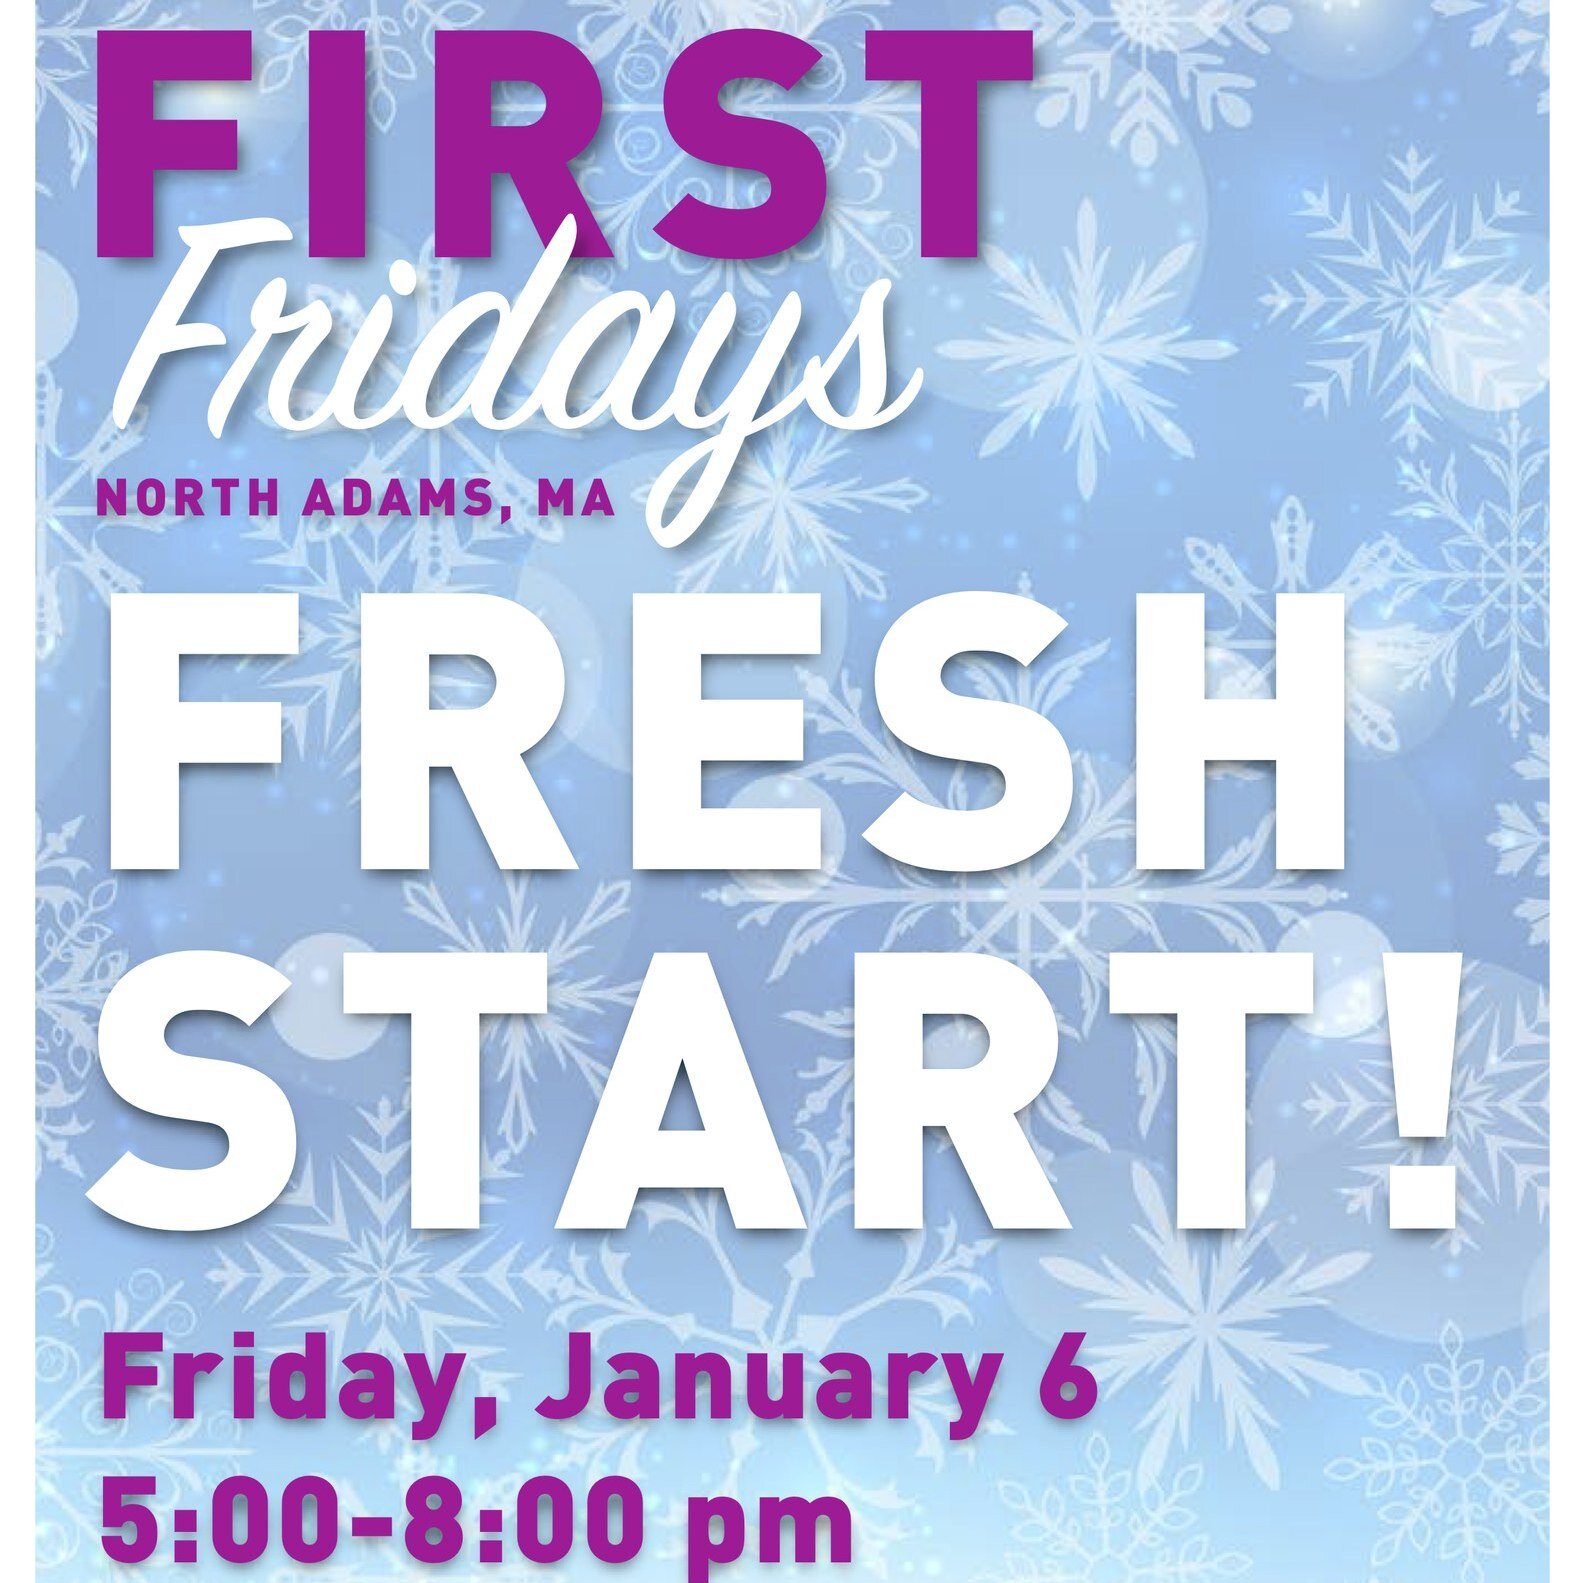 New Year - Fresh Start! 2023 FIRST Fridays kicks off tonight with a variety of events from downtown businesses and organizations. 

Lineup:
-Candlelit Yoga at North Adams Yoga  at 6 p.m. 
This practice invites you to rest deeply, listen to your intui